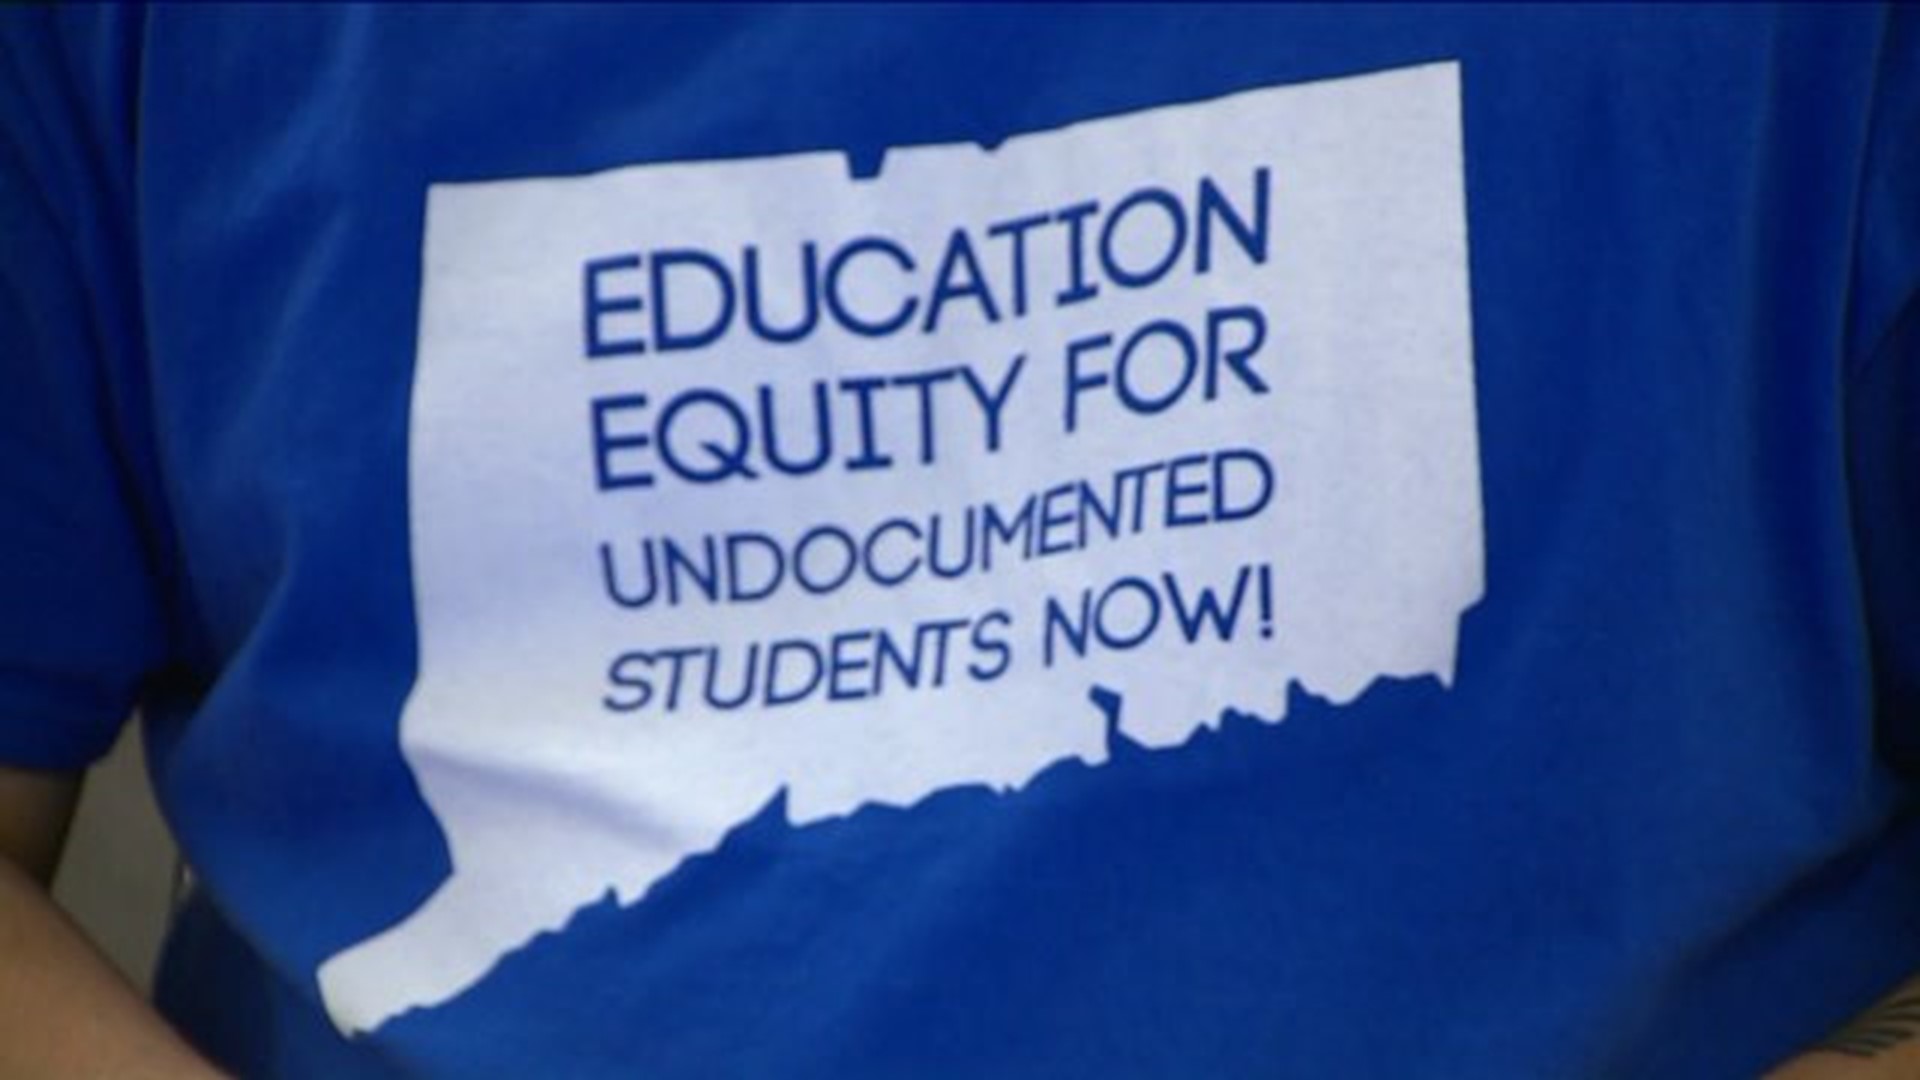 Undocumented students in state`s schools